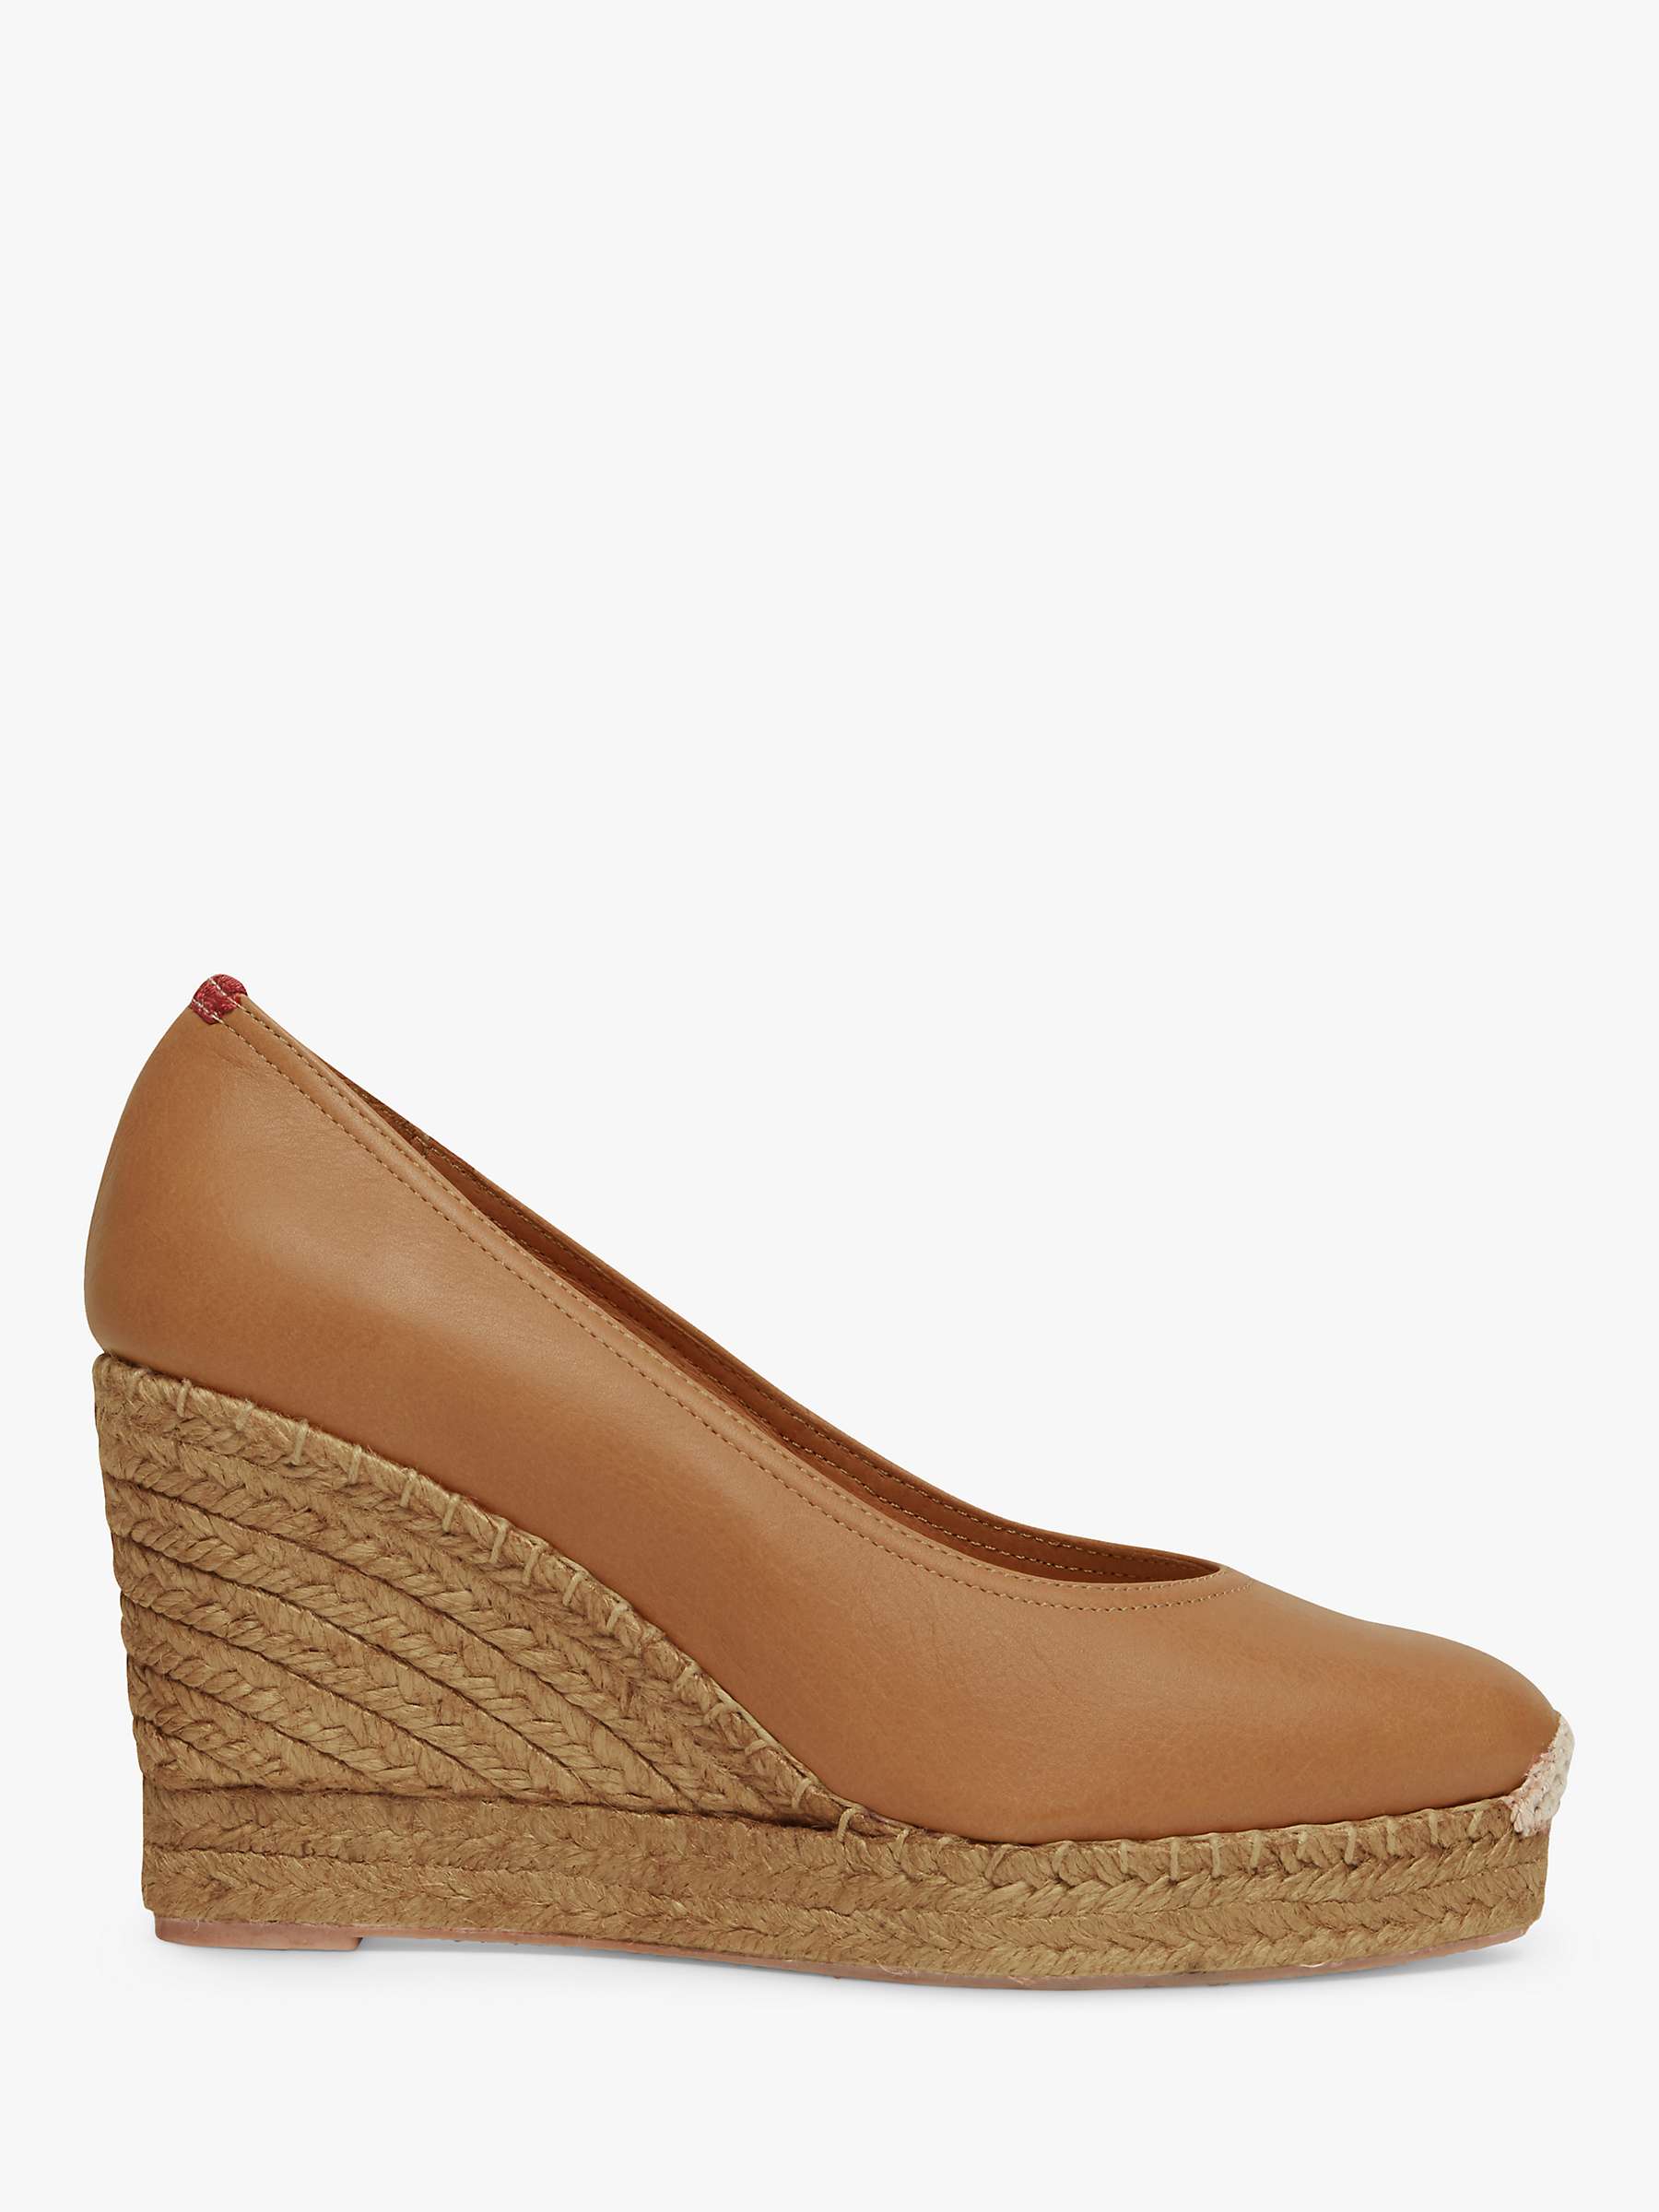 Buy Penelope Chilvers Scoop Court Espadrille Shoes, Tan Online at johnlewis.com